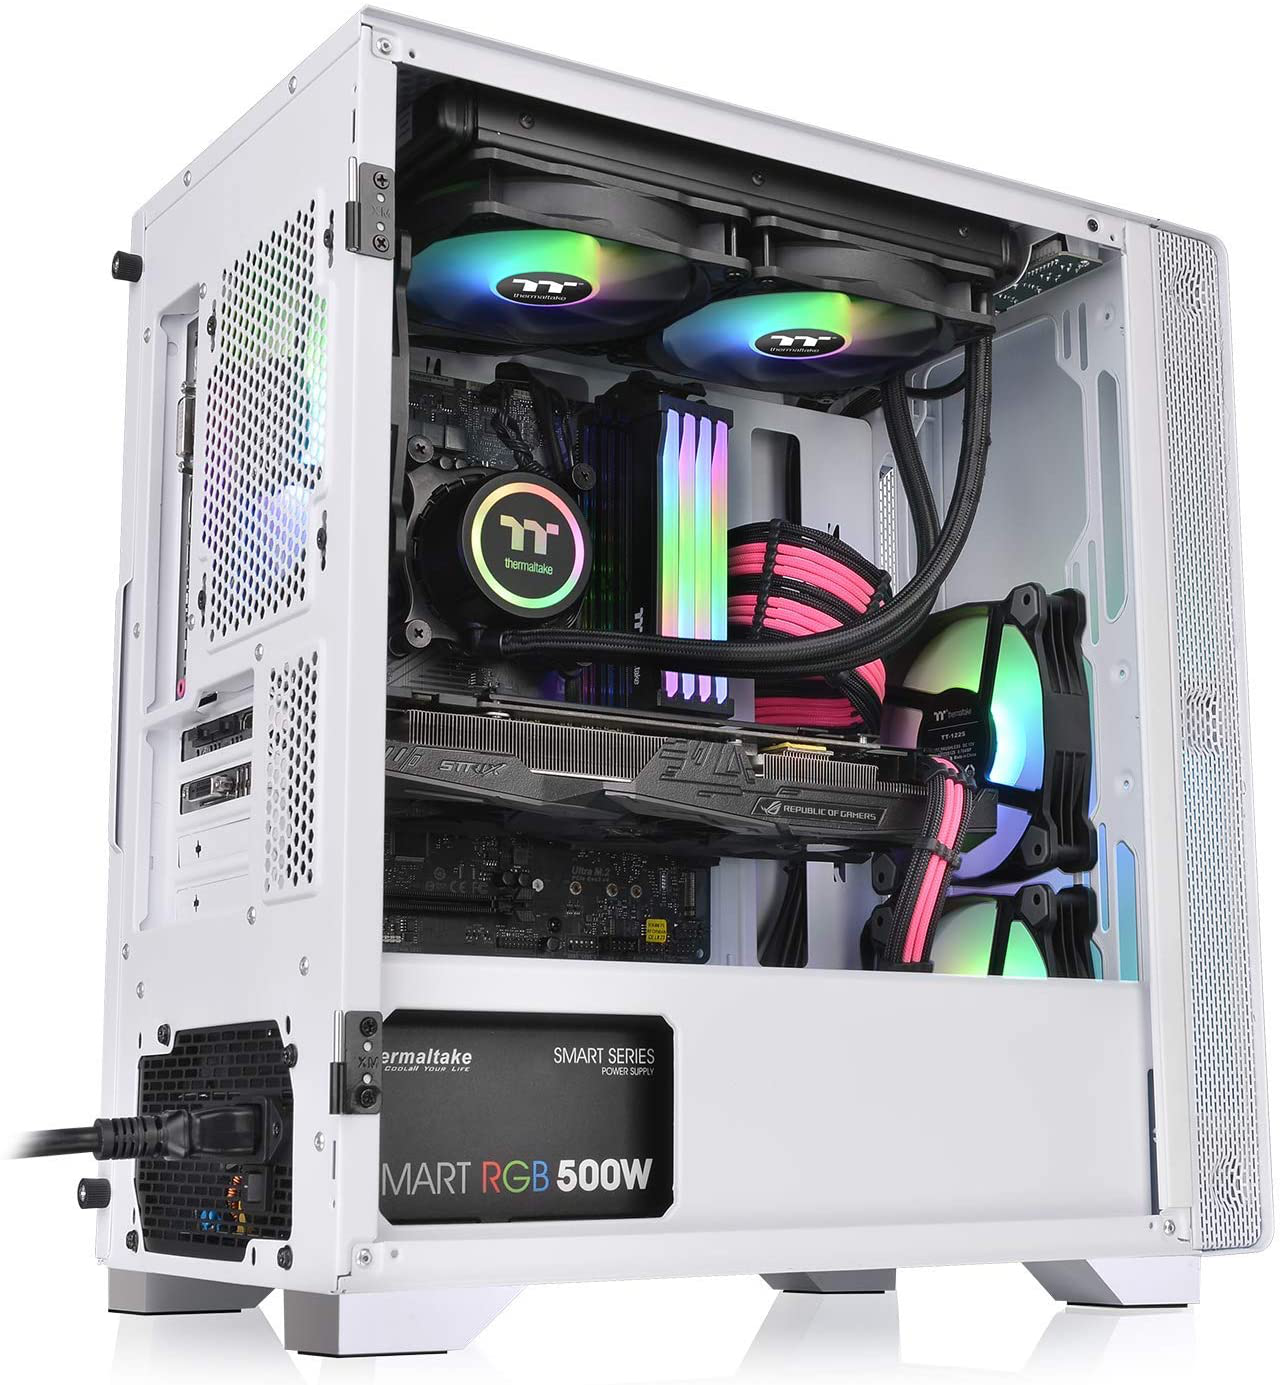 Thermaltake S100 Tempered Glass Snow Edition Micro-Atx Mini-Tower Computer Case with 120Mm Rear Fan Pre-Installed CA-1Q9-00S6WN-00, White